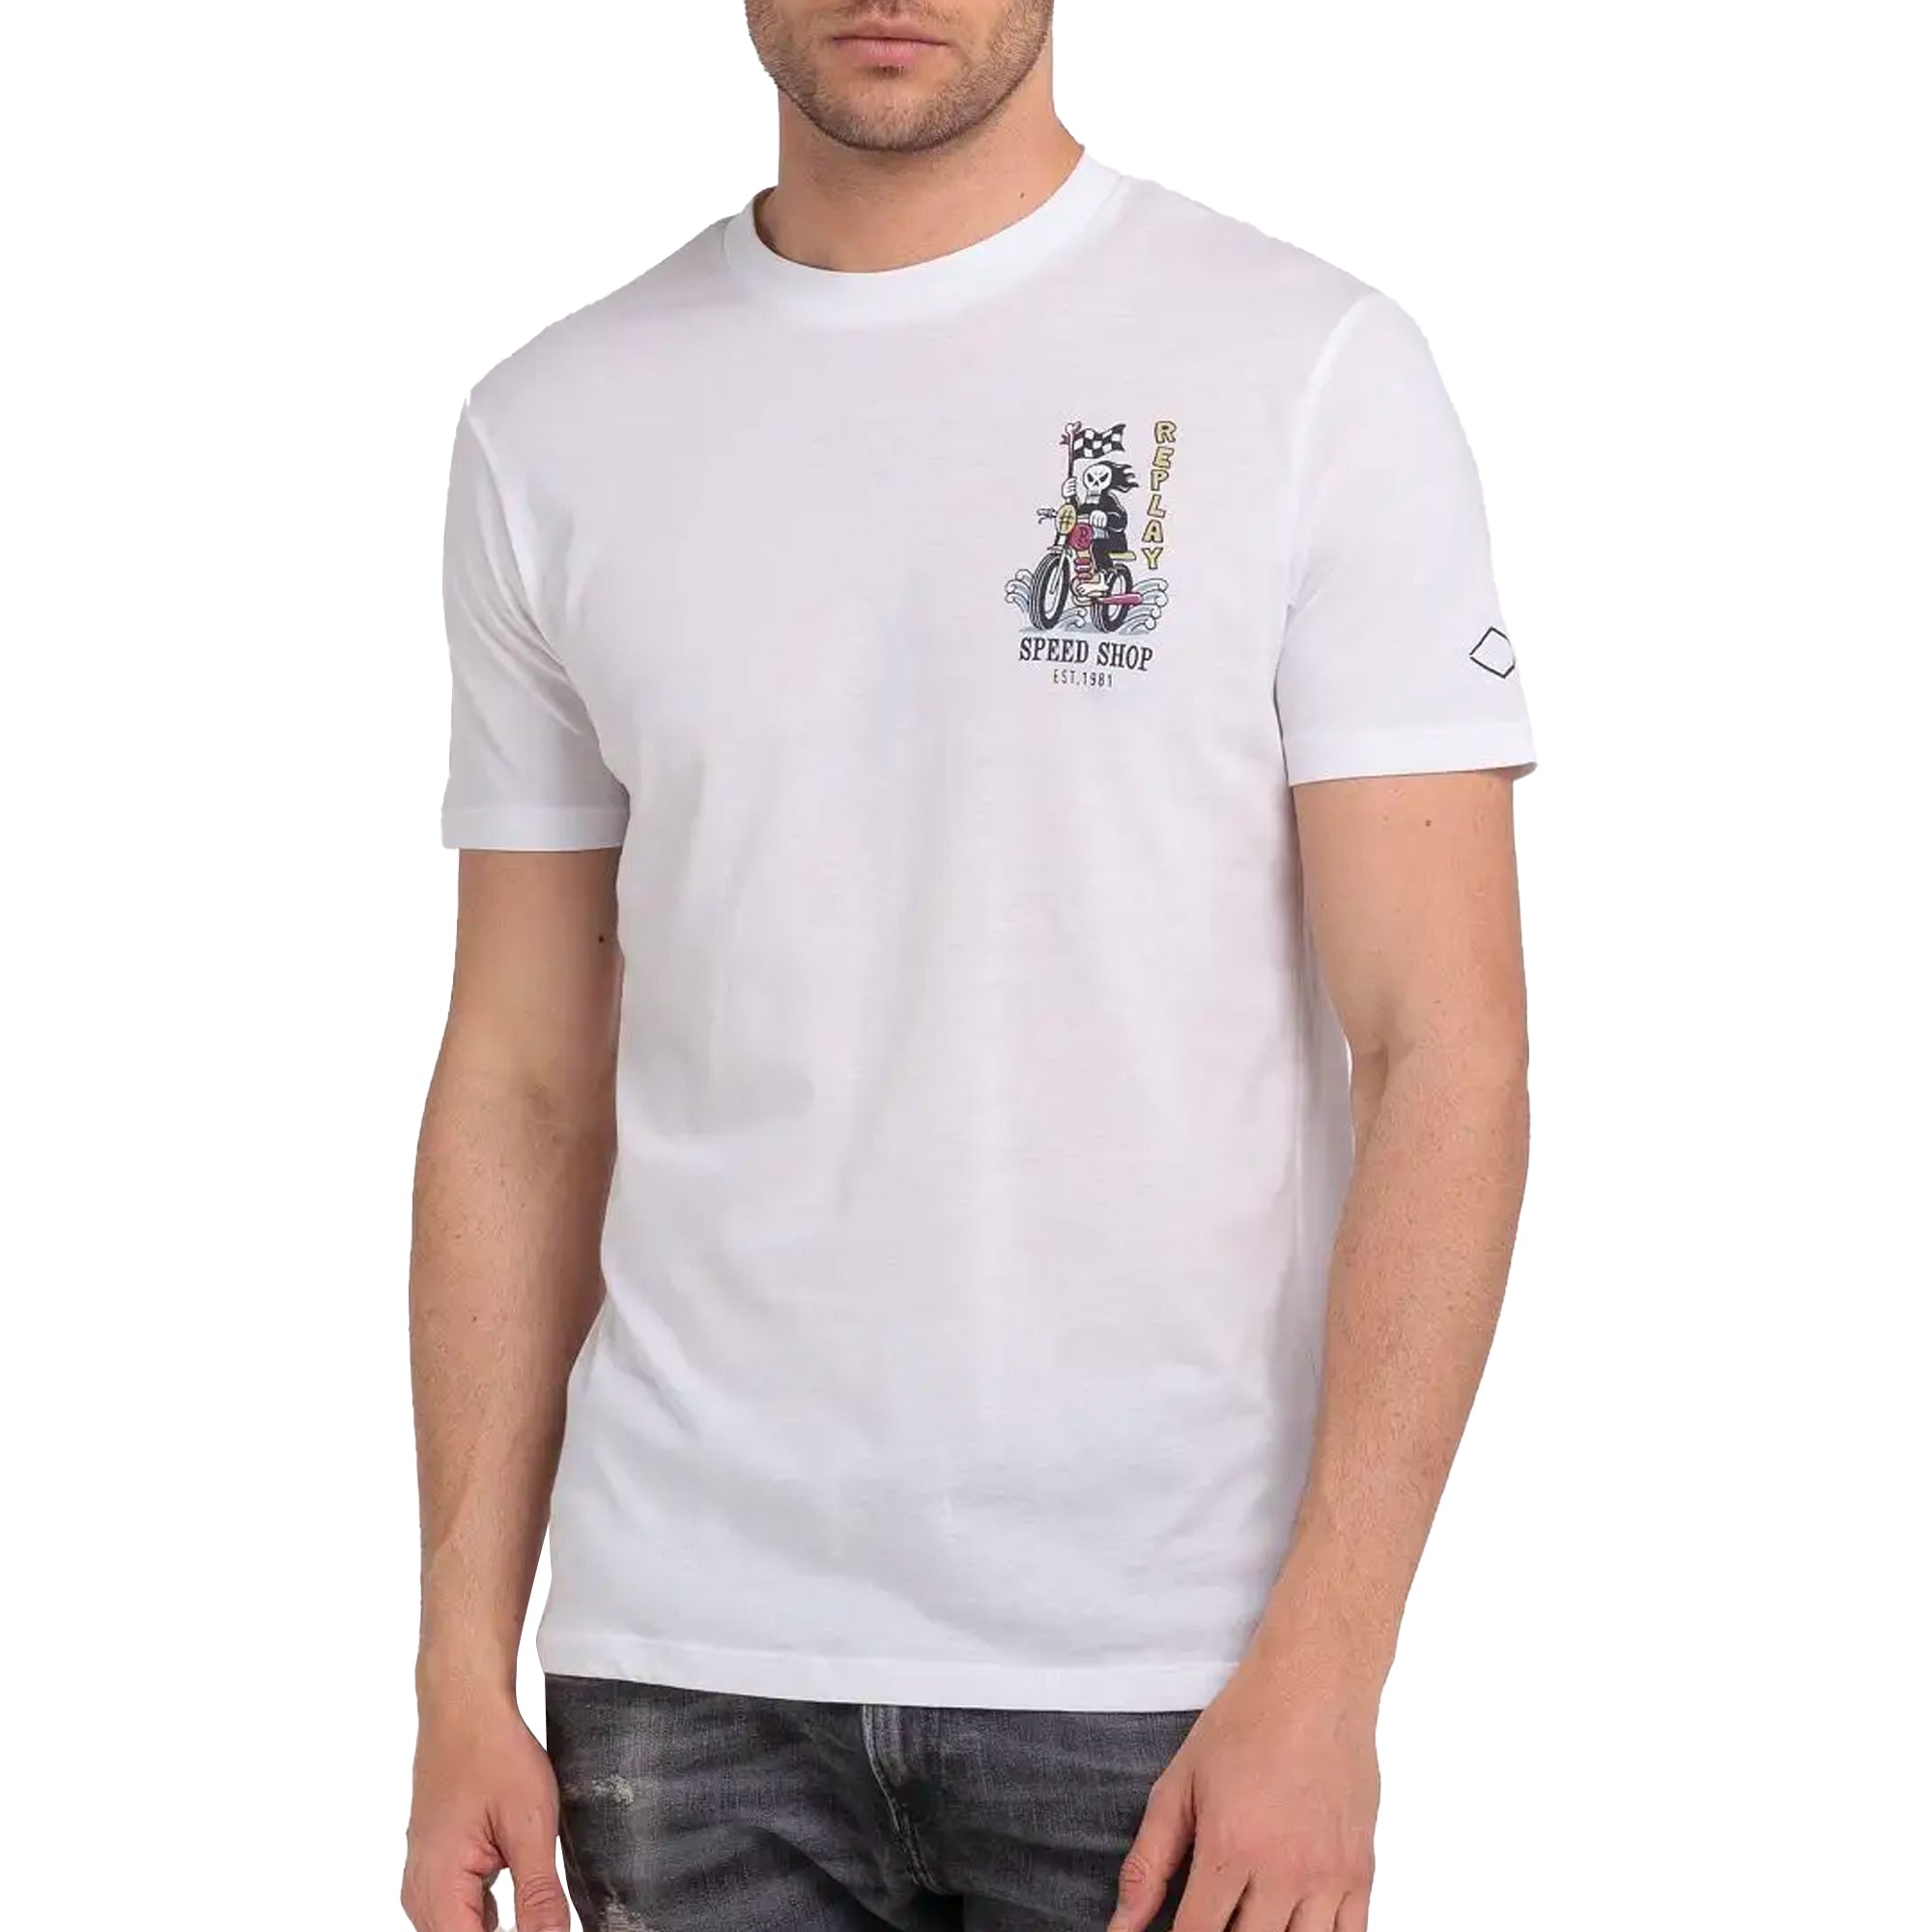 Replay Death Racer T-Shirt - White